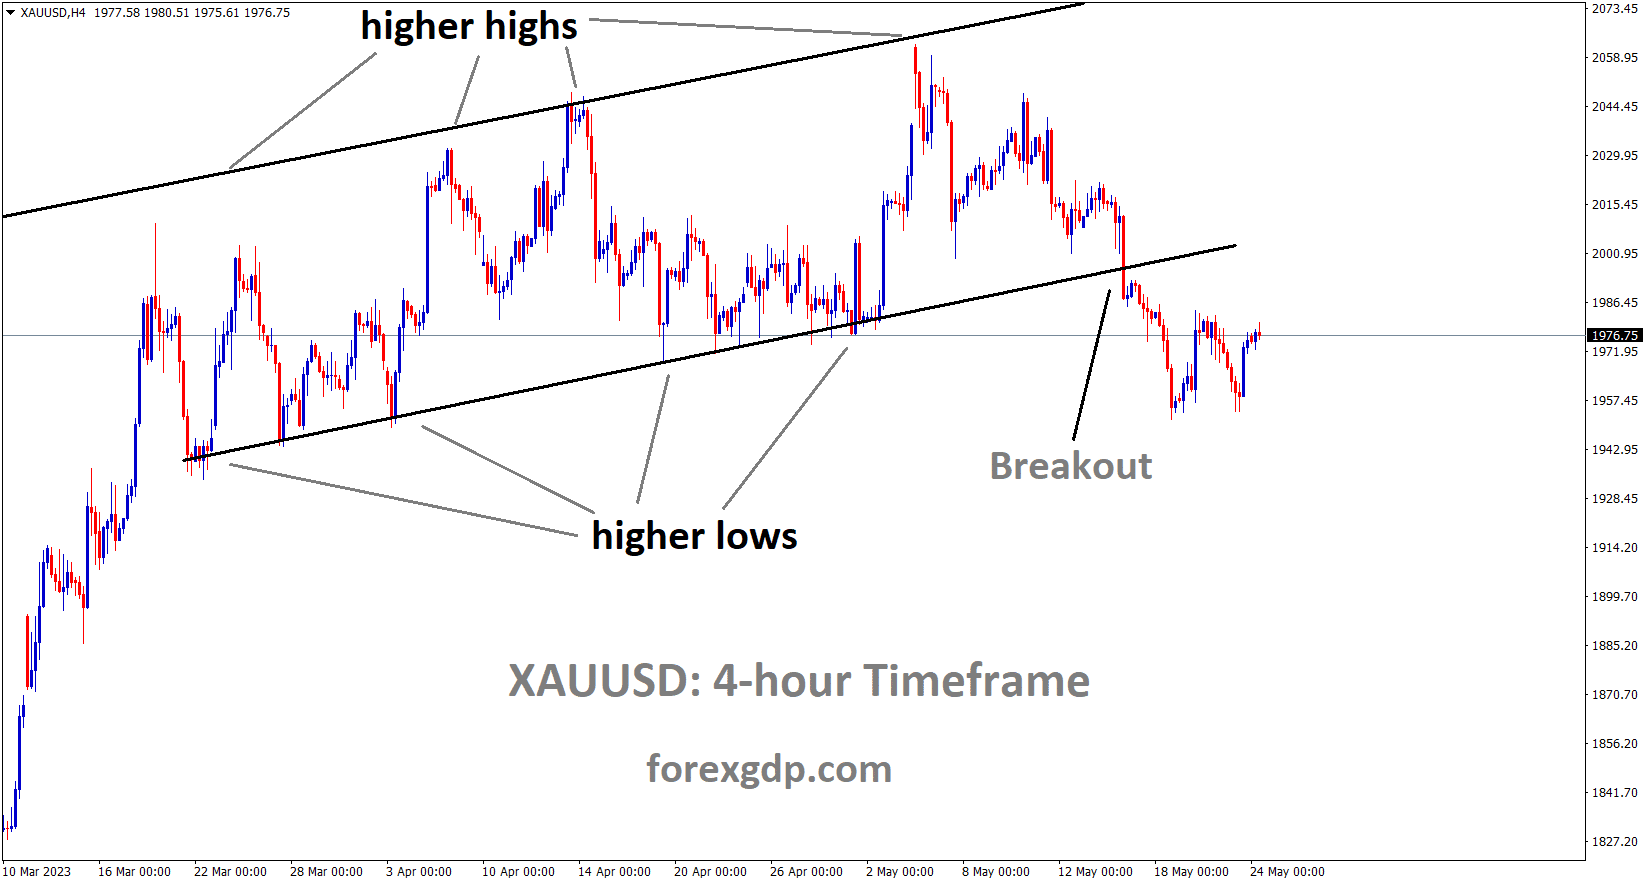 XAUUSD H4 TF analysis Market has broken the Ascending channel in downside